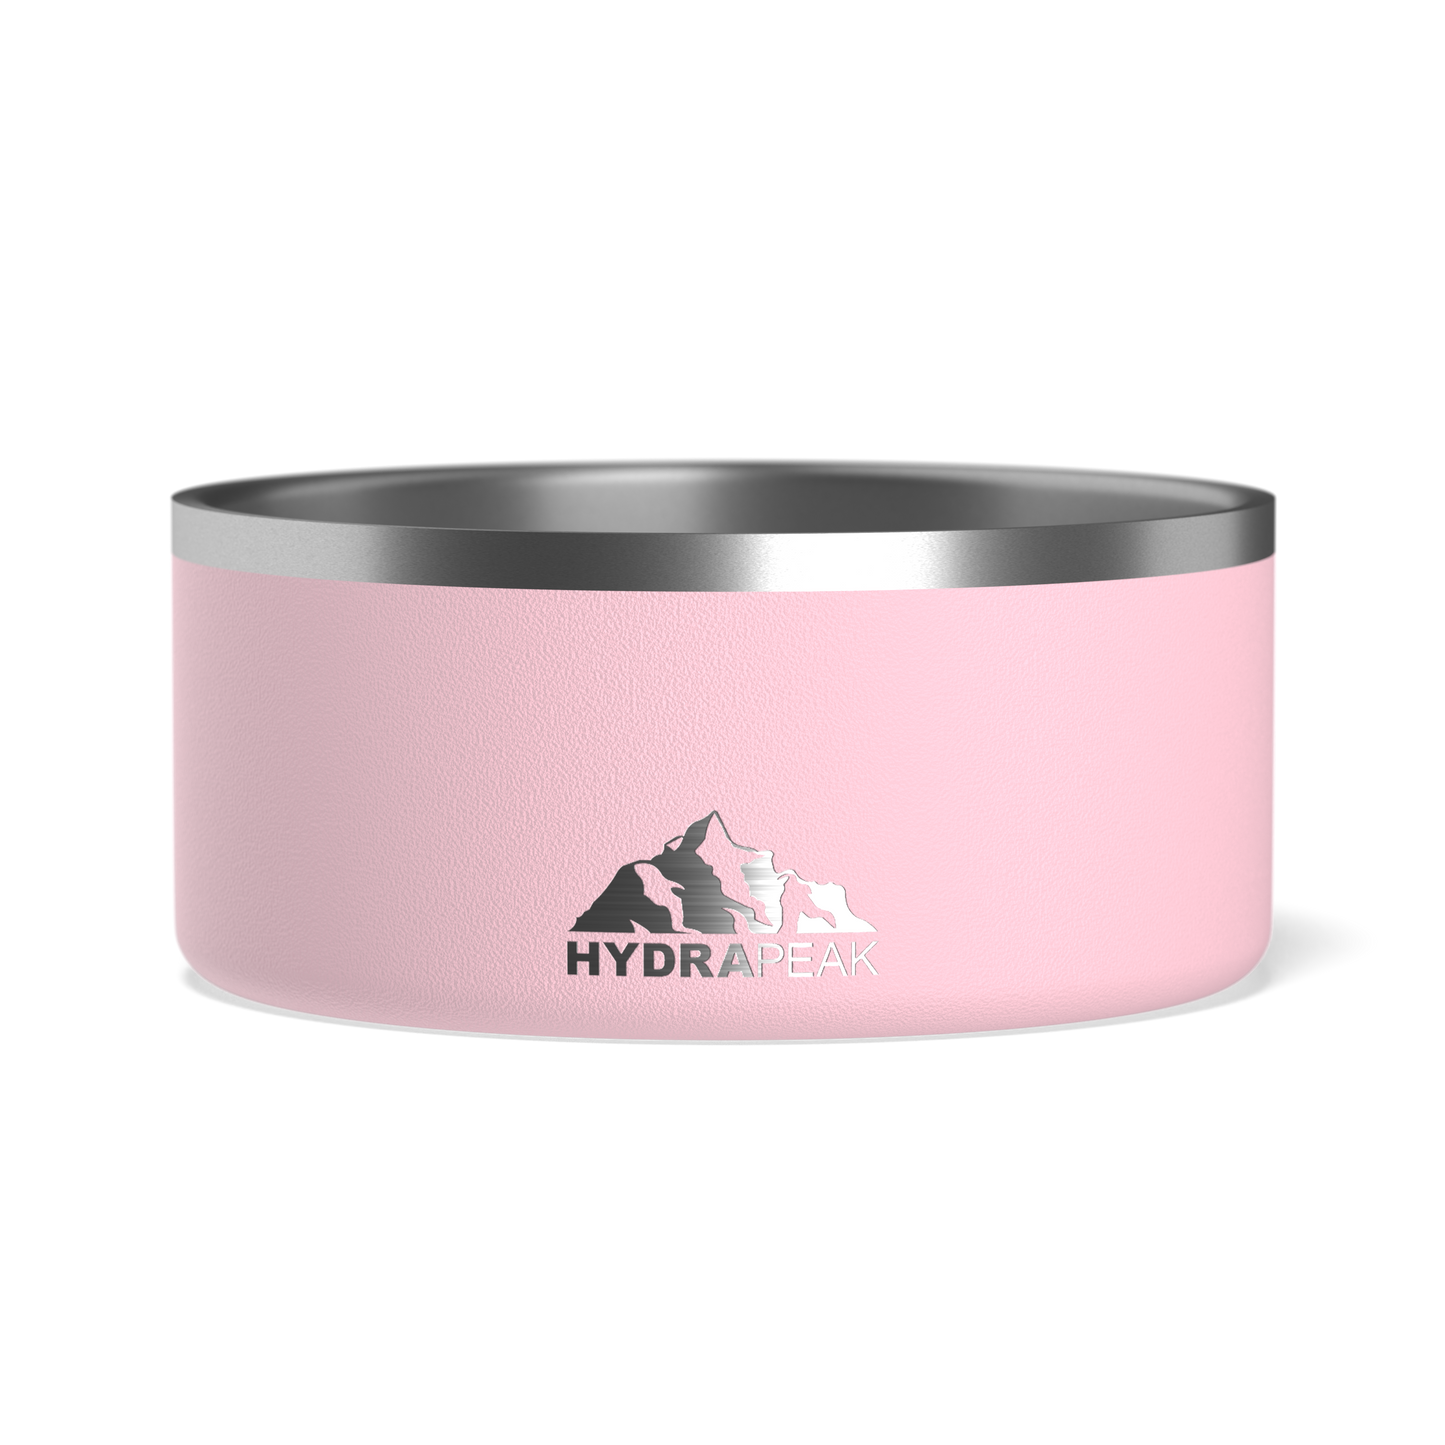 8 Cup Stainless Steel Dog Bowls for Water or Food - Pink